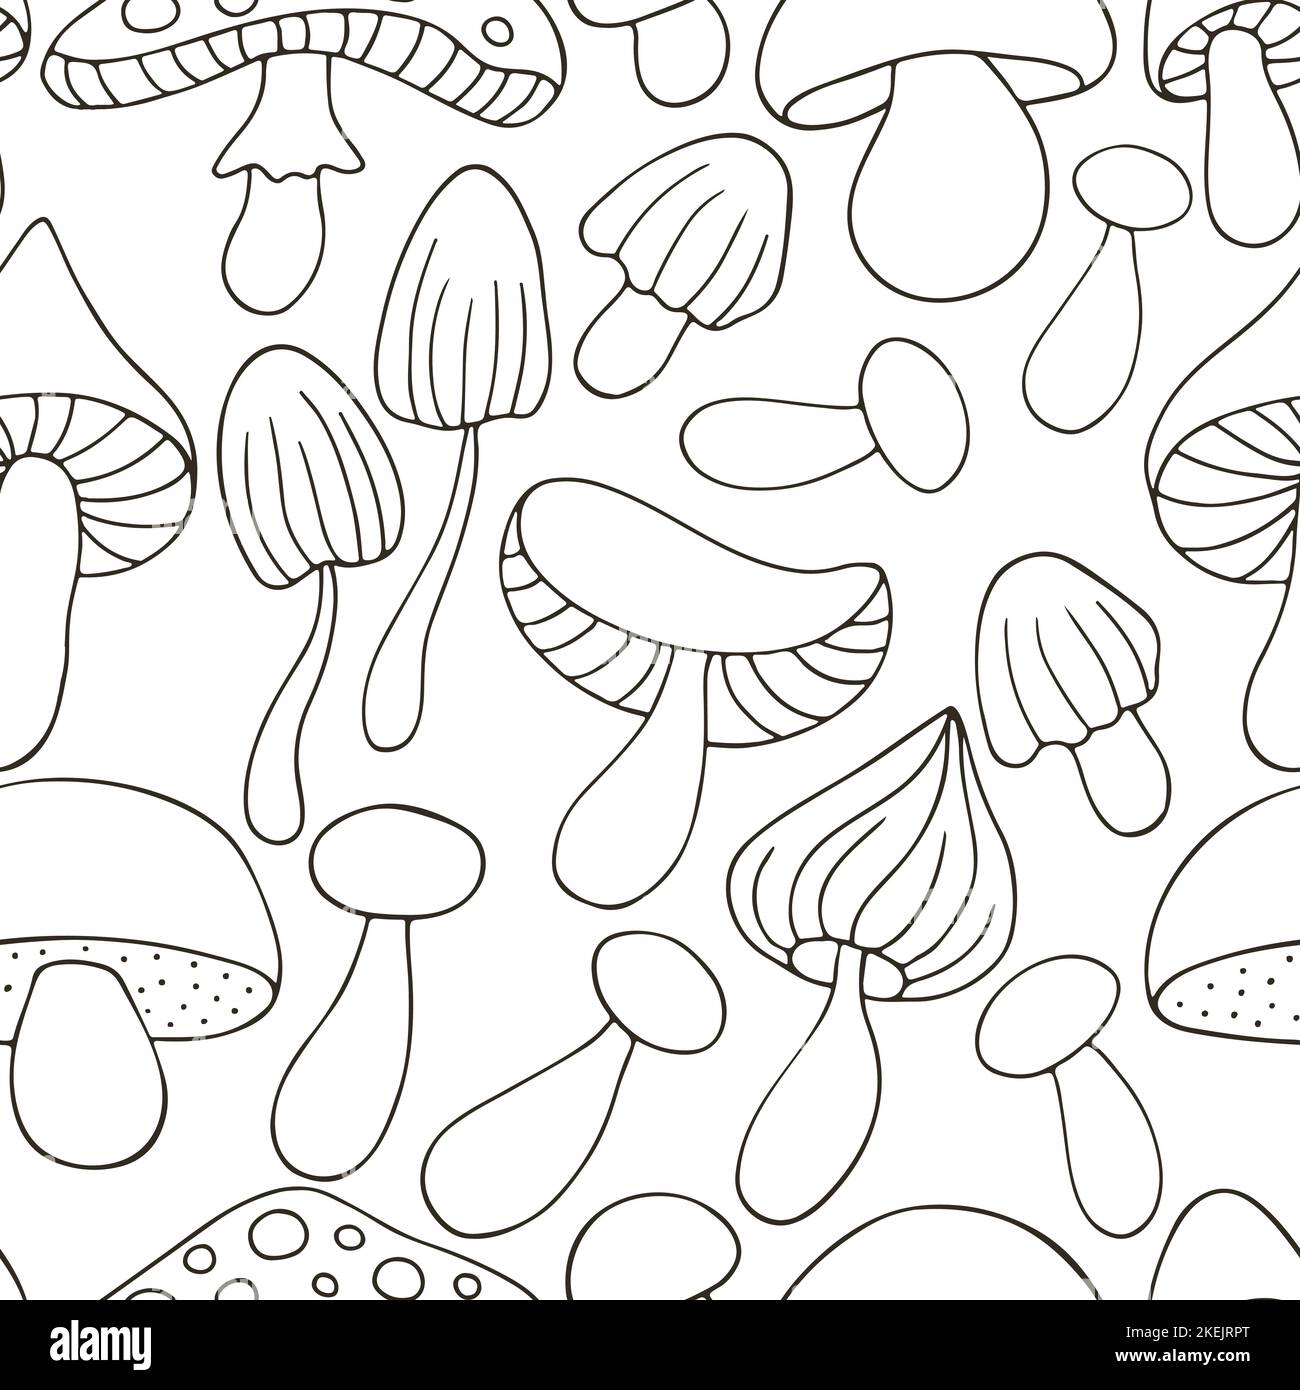 Mushroom autumn mood. Illustration in hand draw style. Seamless pattern with forest mushrooms. Can be used for fabric, packaging, wrapping paper and e Stock Vector